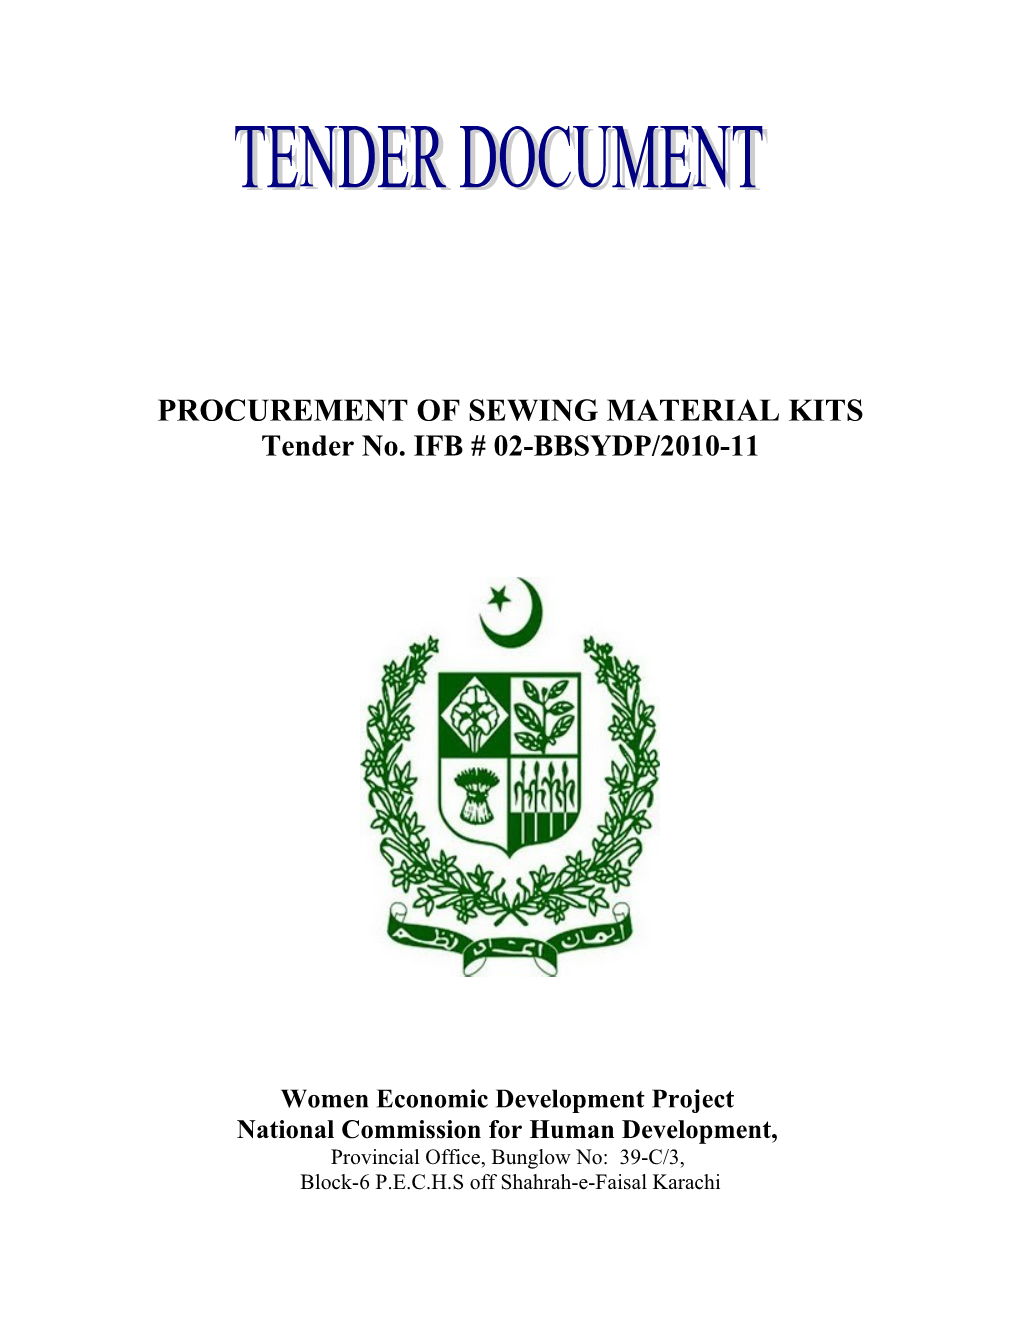 Procurement of Sewing Material Kits